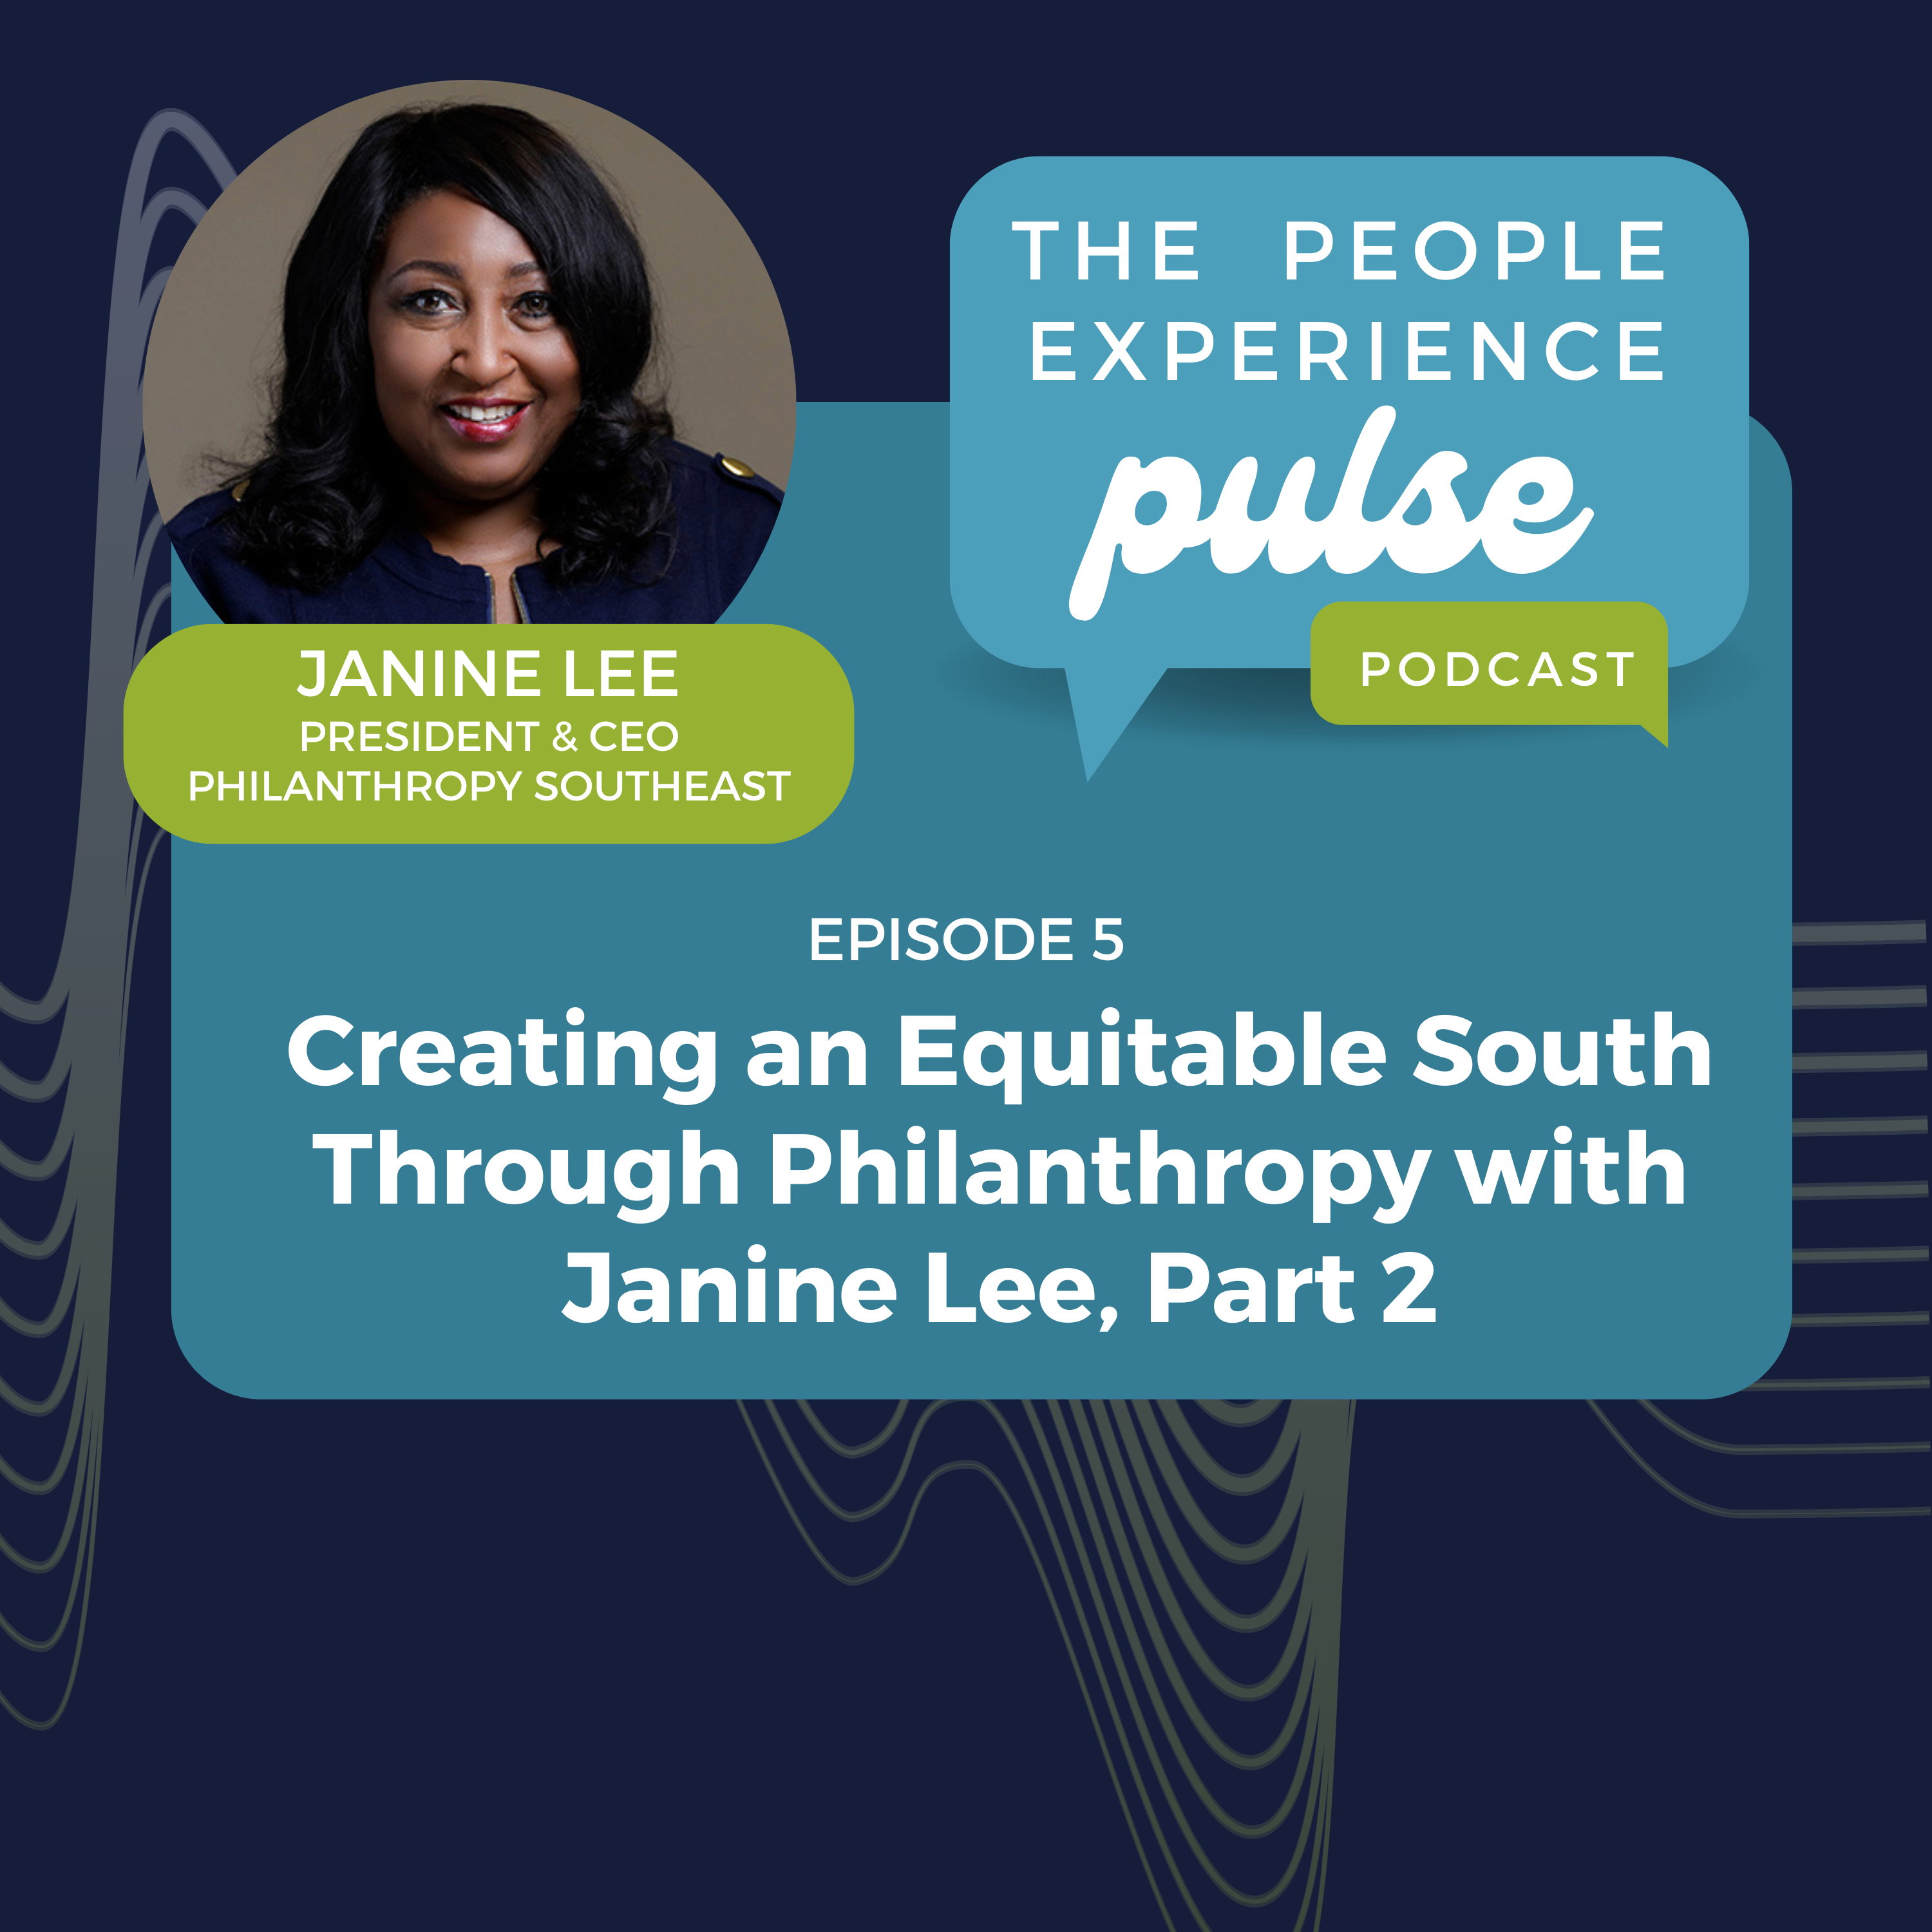 Episode 4: Creating an Equitable South Through Philanthropy with Janine Lee, Part 2